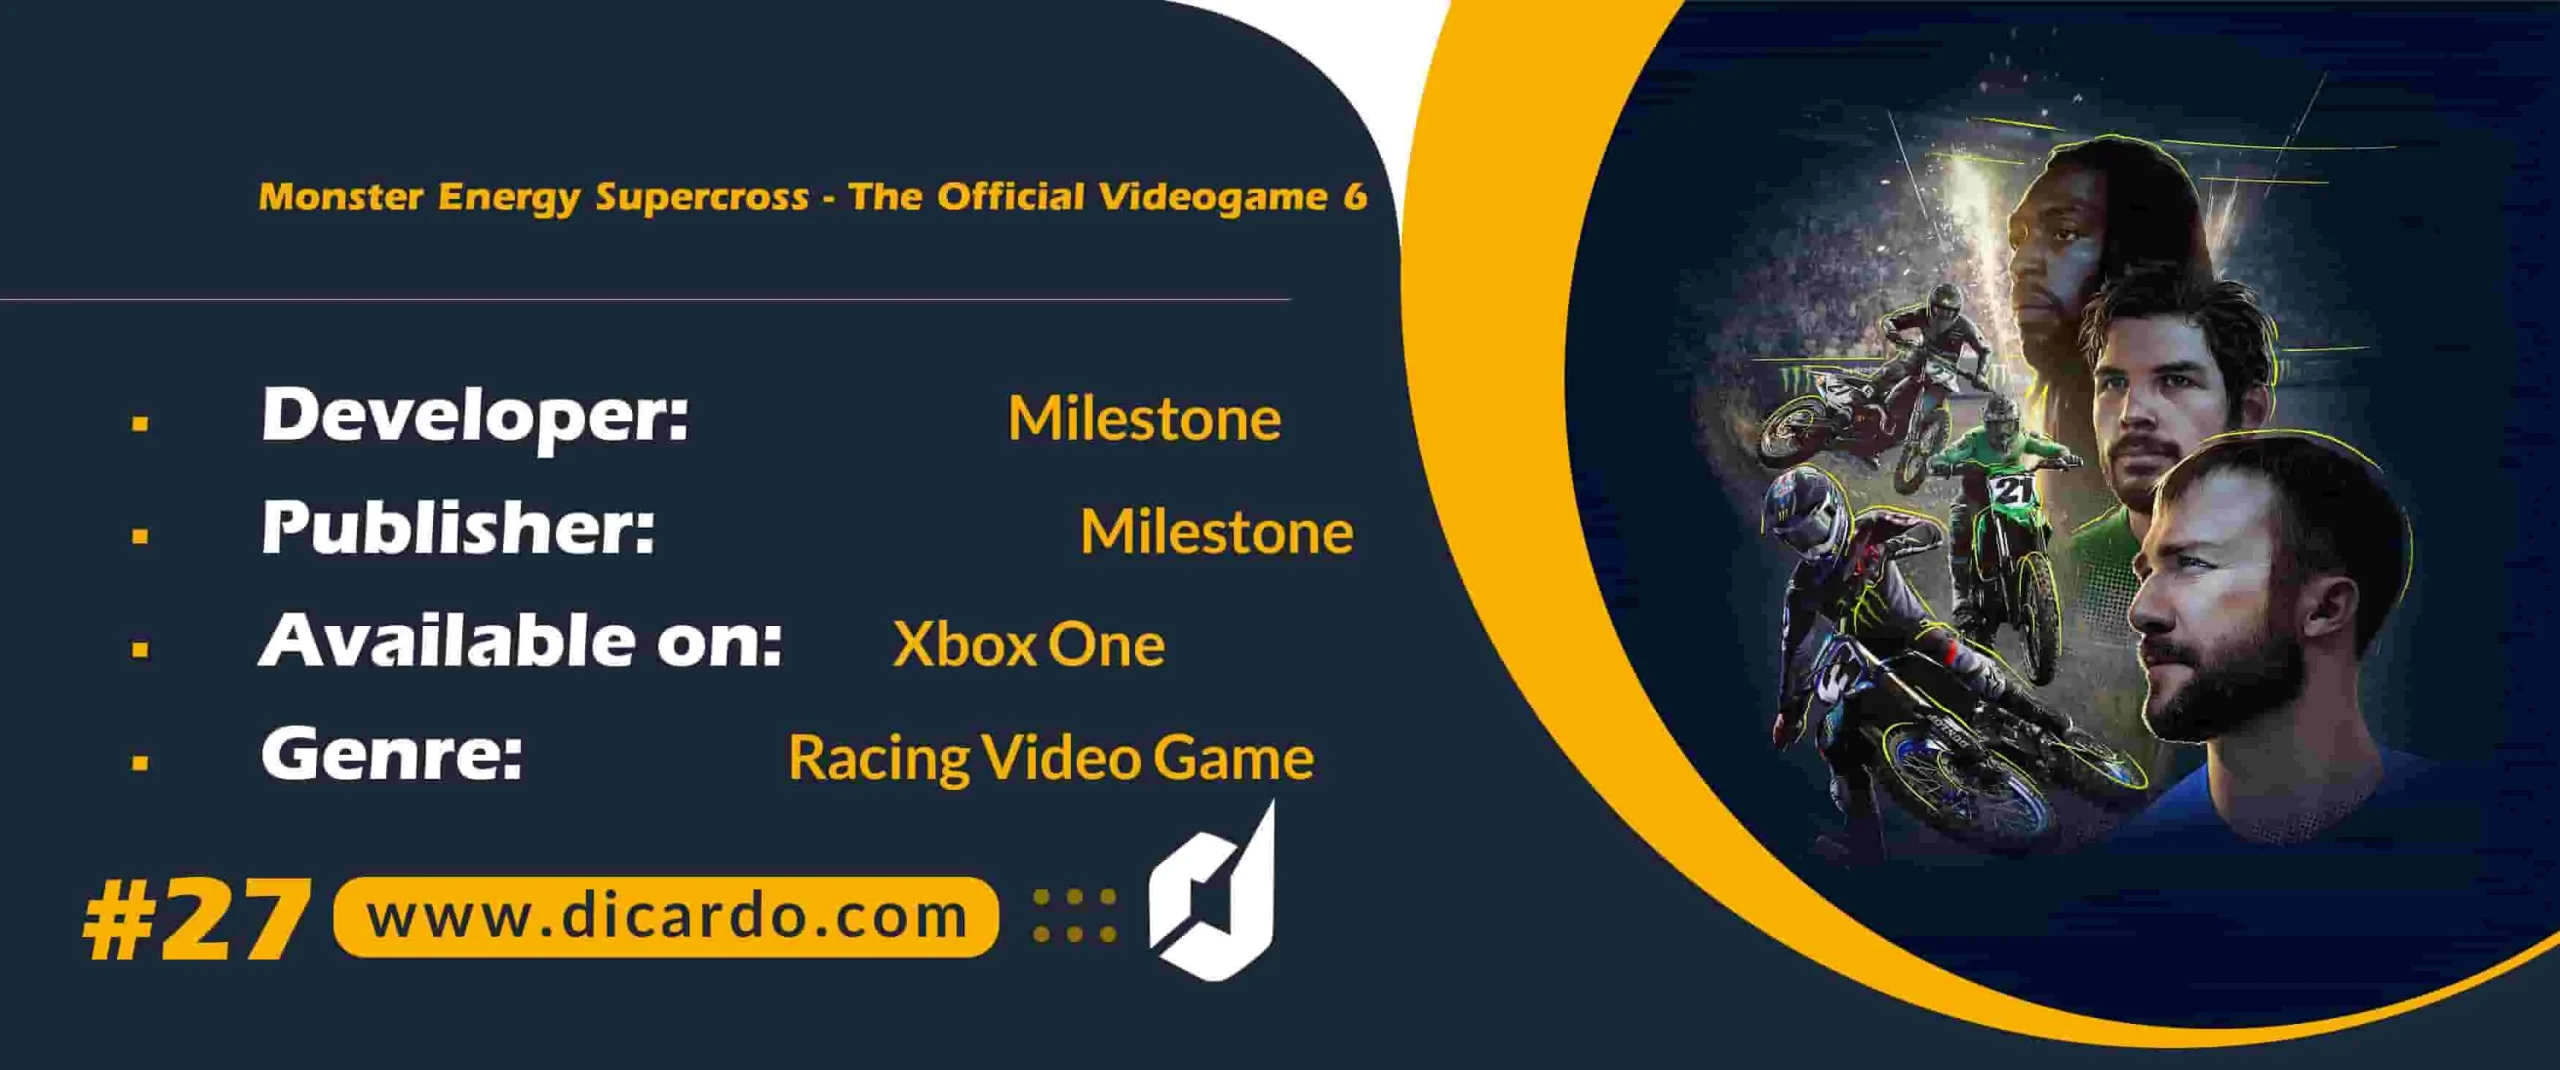 #27 Monster Energy Supercross - The Official Videogame 6